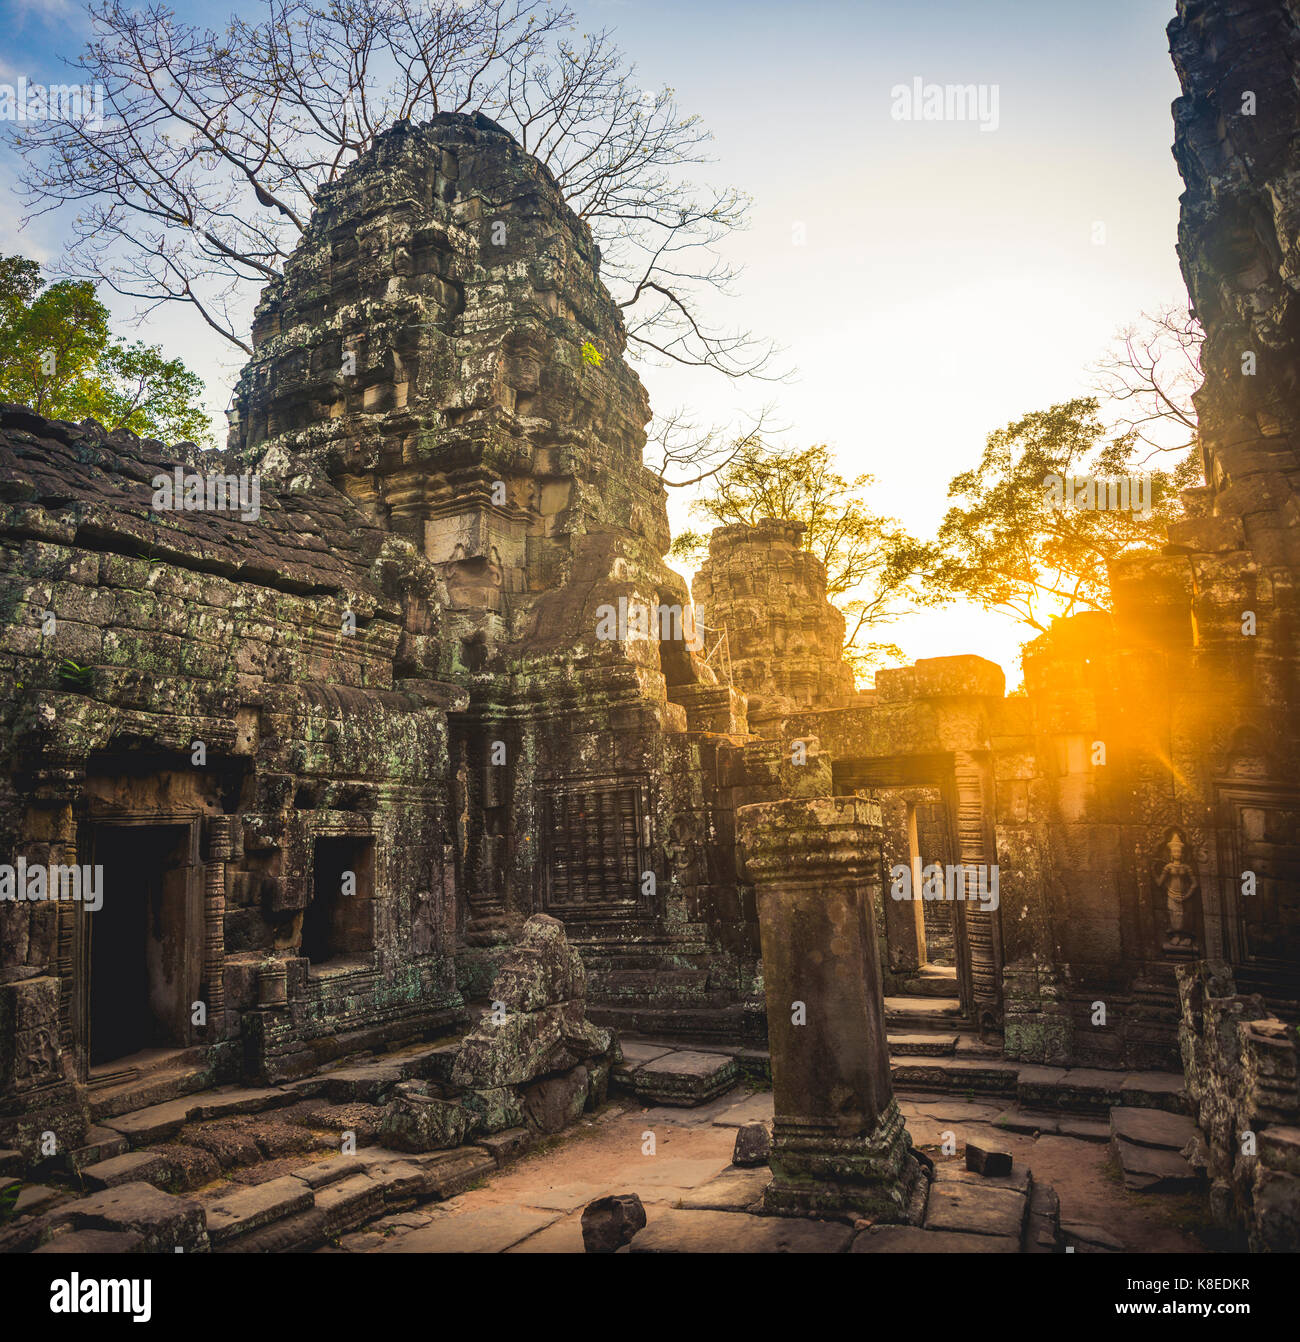 Courtyard with prasat, sunset, back light, ruined temple ruins, Banteay Kdei Temple, Angkor, Siem Reap Province, Cambodia Stock Photo